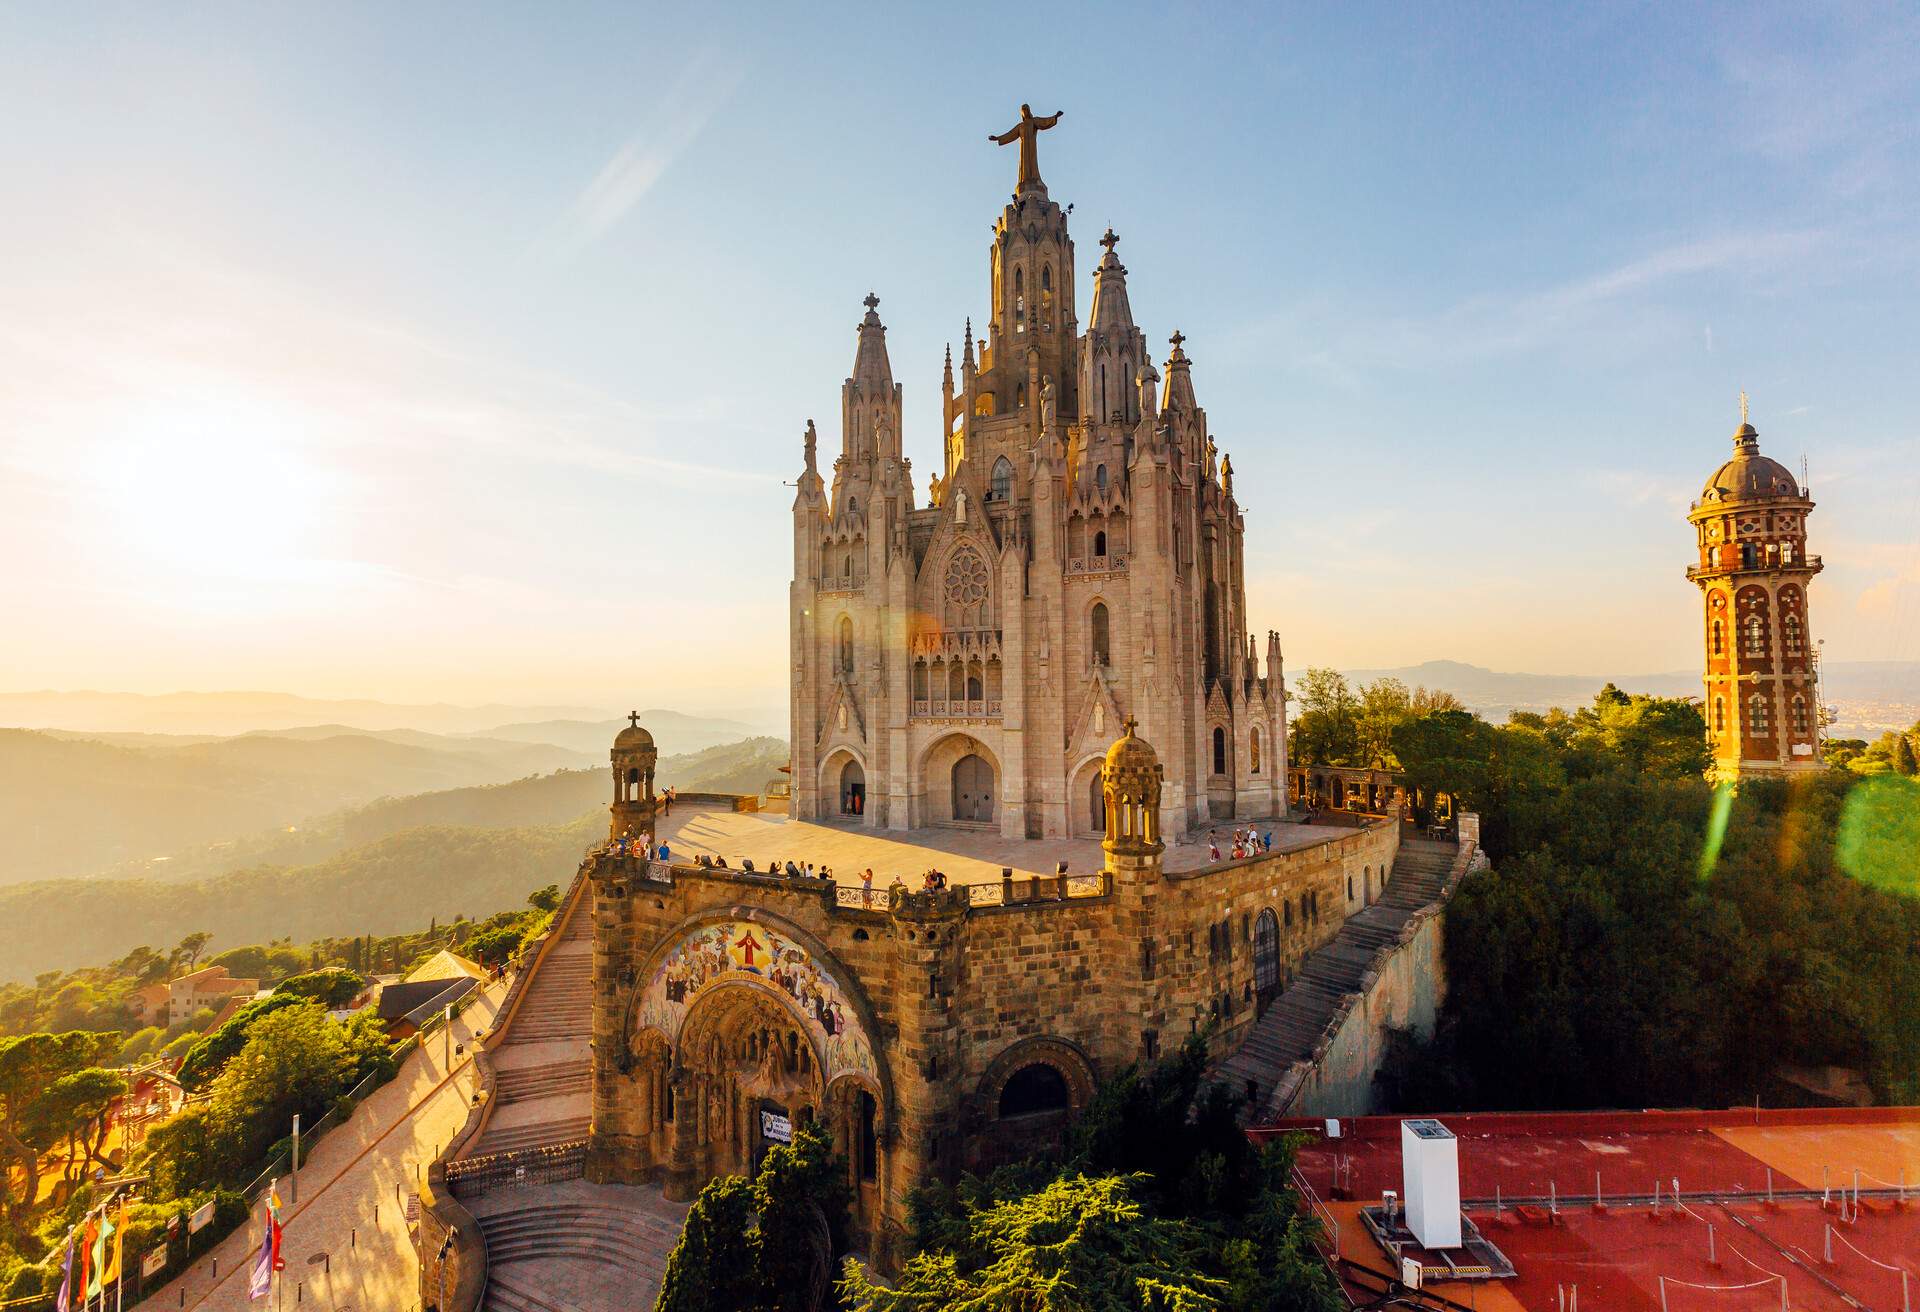 The Romanesque architecture crypt is topped by a palace-like neo-Gothic church of the Expiatory Church of the Sacred Heart of Jesus at the summit of the lush Mount Tibidabo in Barcelona, Spain.